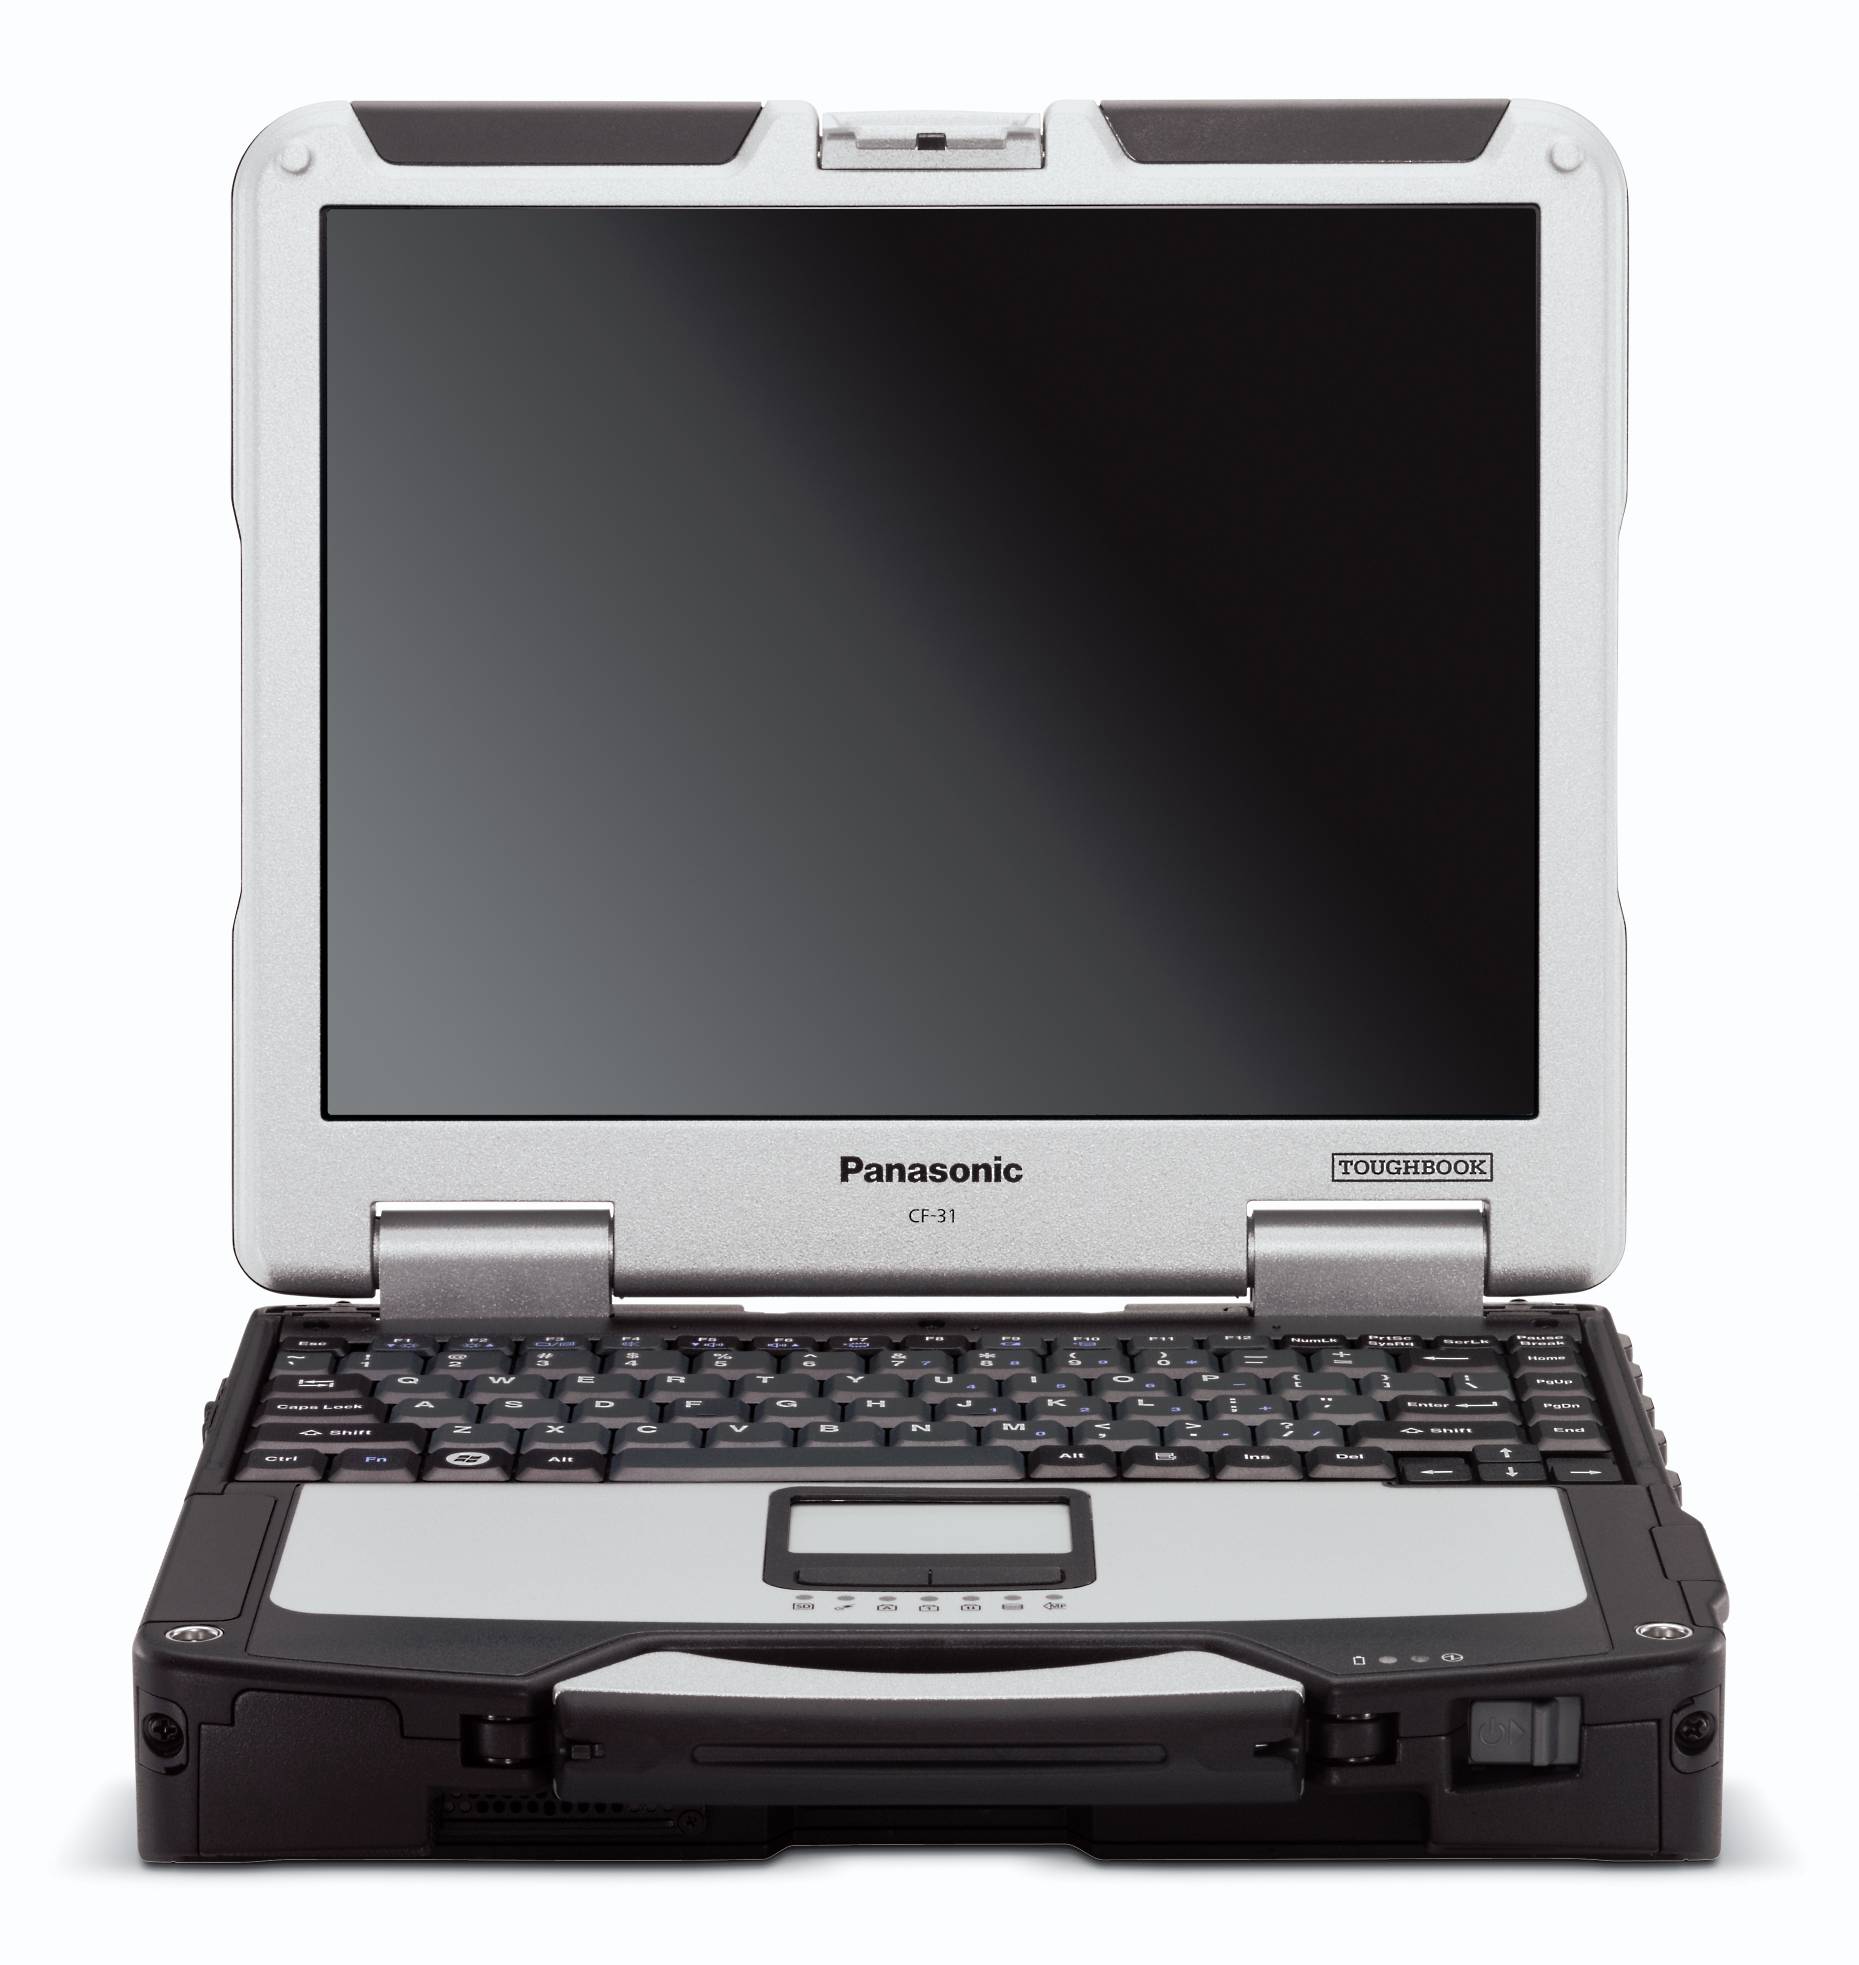 Used Panasonic A Grade CF-31 Toughbook 13.1-inch (Touch LED 1024 x 768) 2.53GHz Core i5 256GB SSD 8 GB Memory GOBI Broadband 4G LTE GPS Smartcard Digi Pen Win 8 Pro OS Power Adapter Included - image 1 of 2